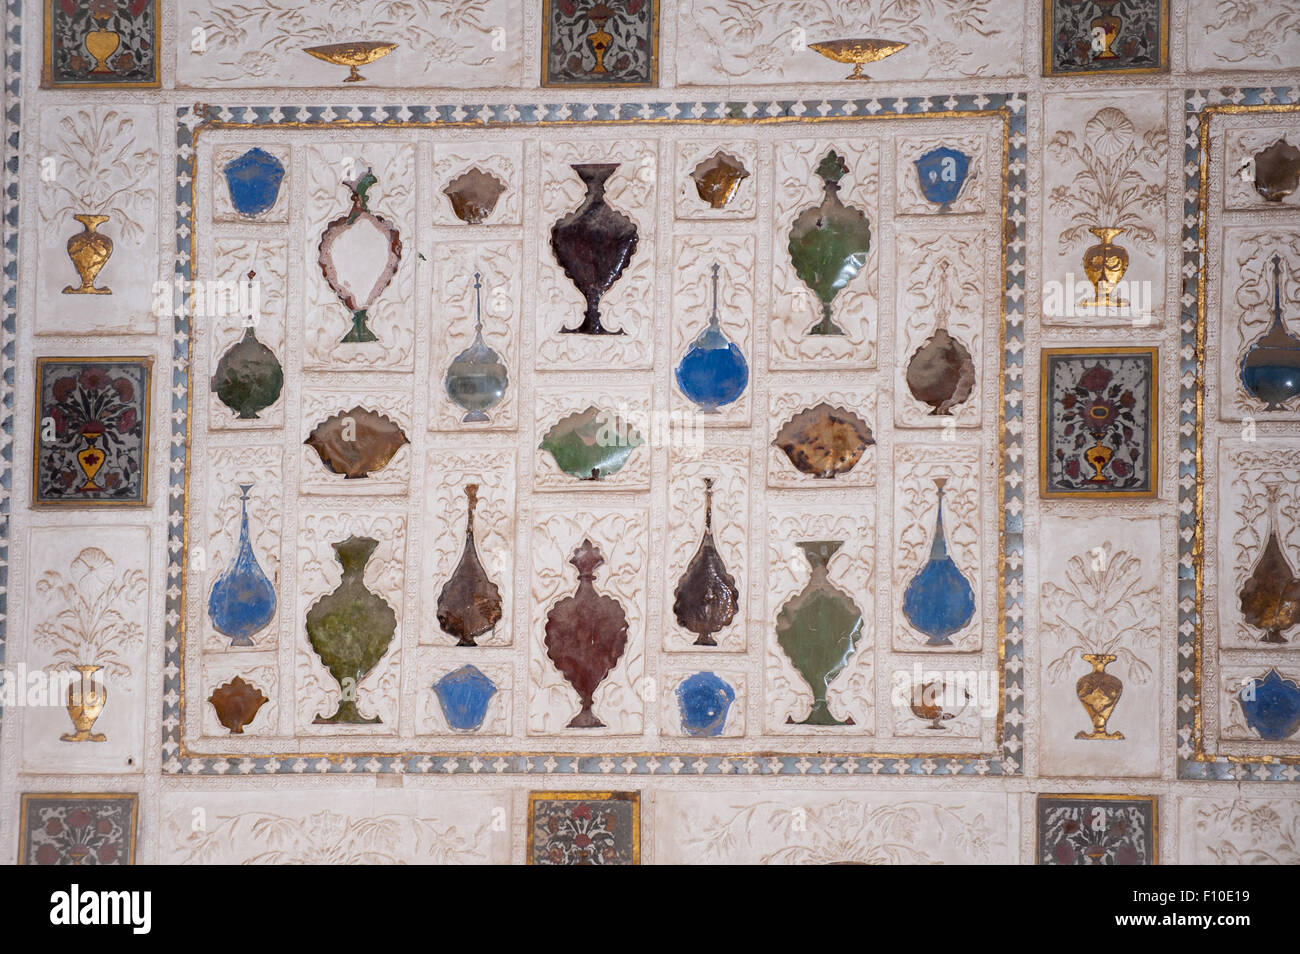 Jaipur, India. The Amber fort, semi precious stone in the shape of bottles inlay work. Stock Photo